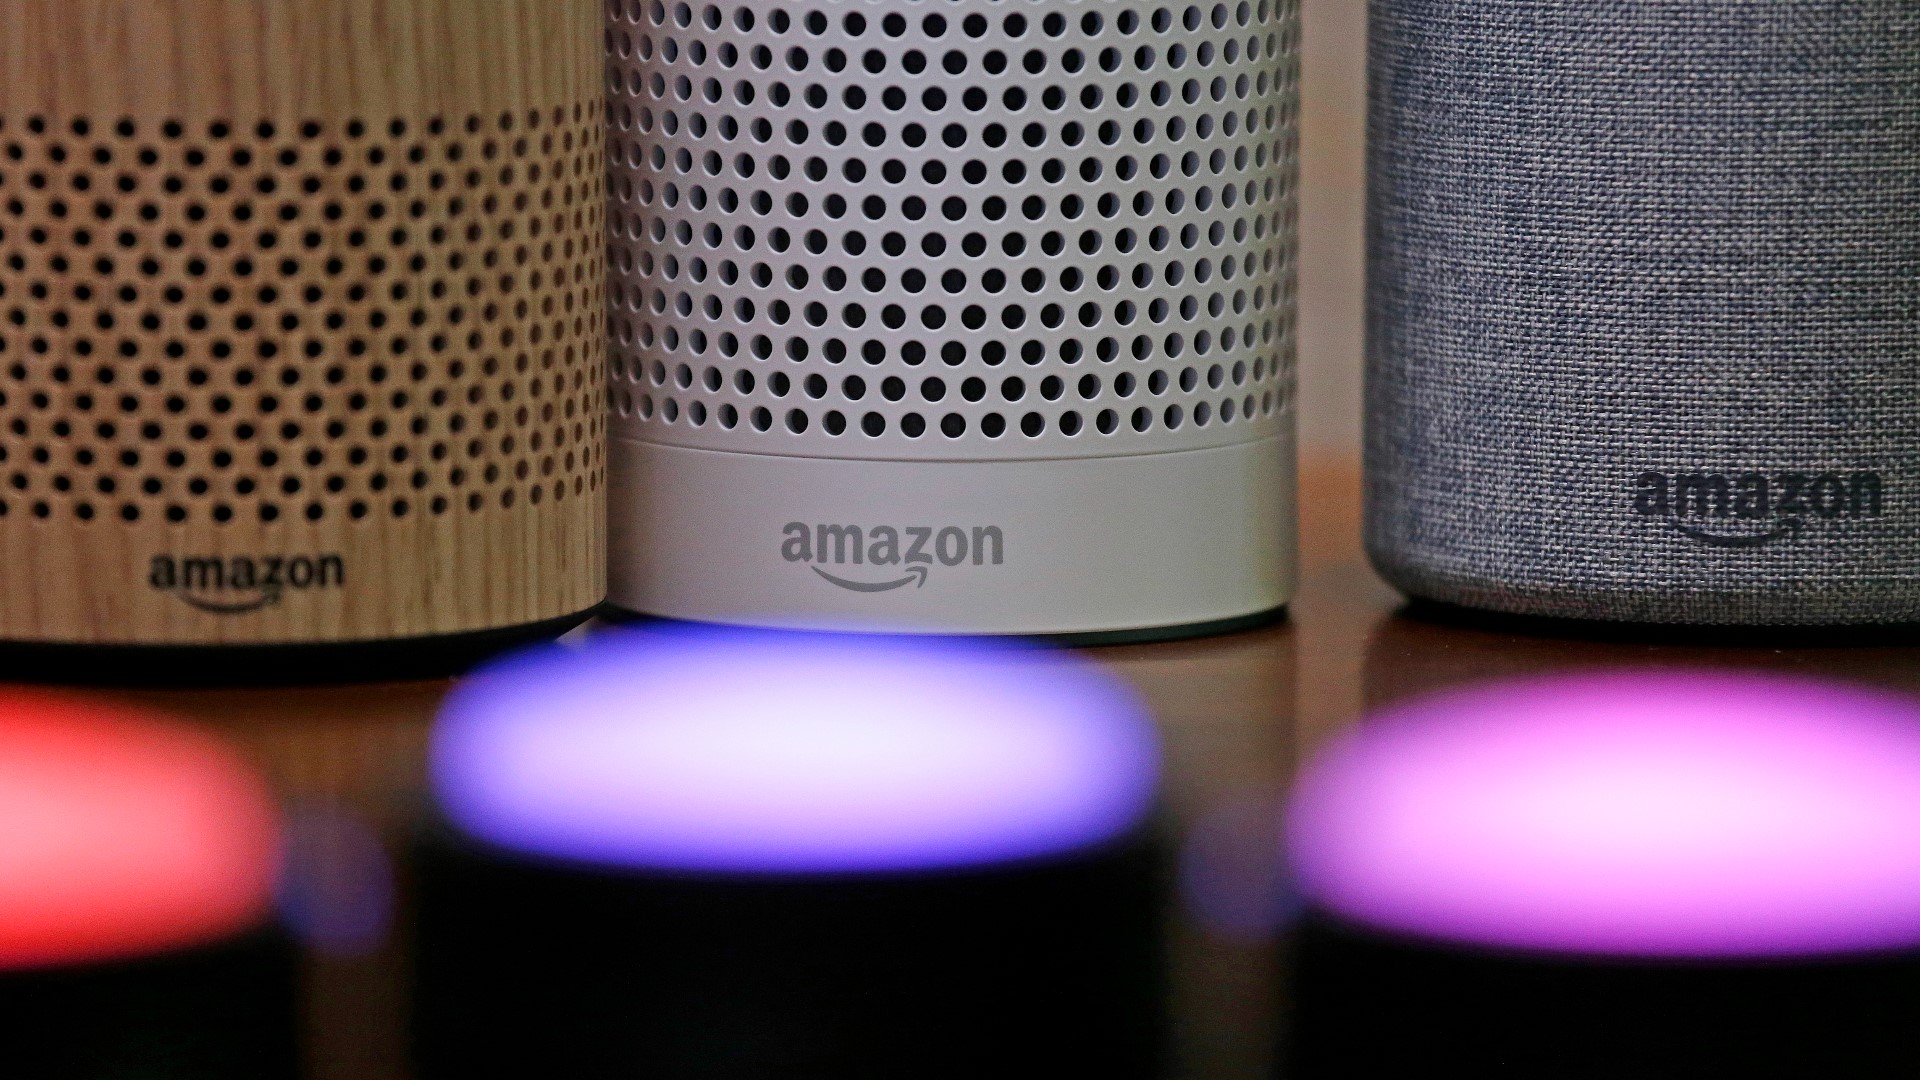 Amazon's Alexa is now offering a feature where a loved one's voice can be used instead of the standard Alexa voice.